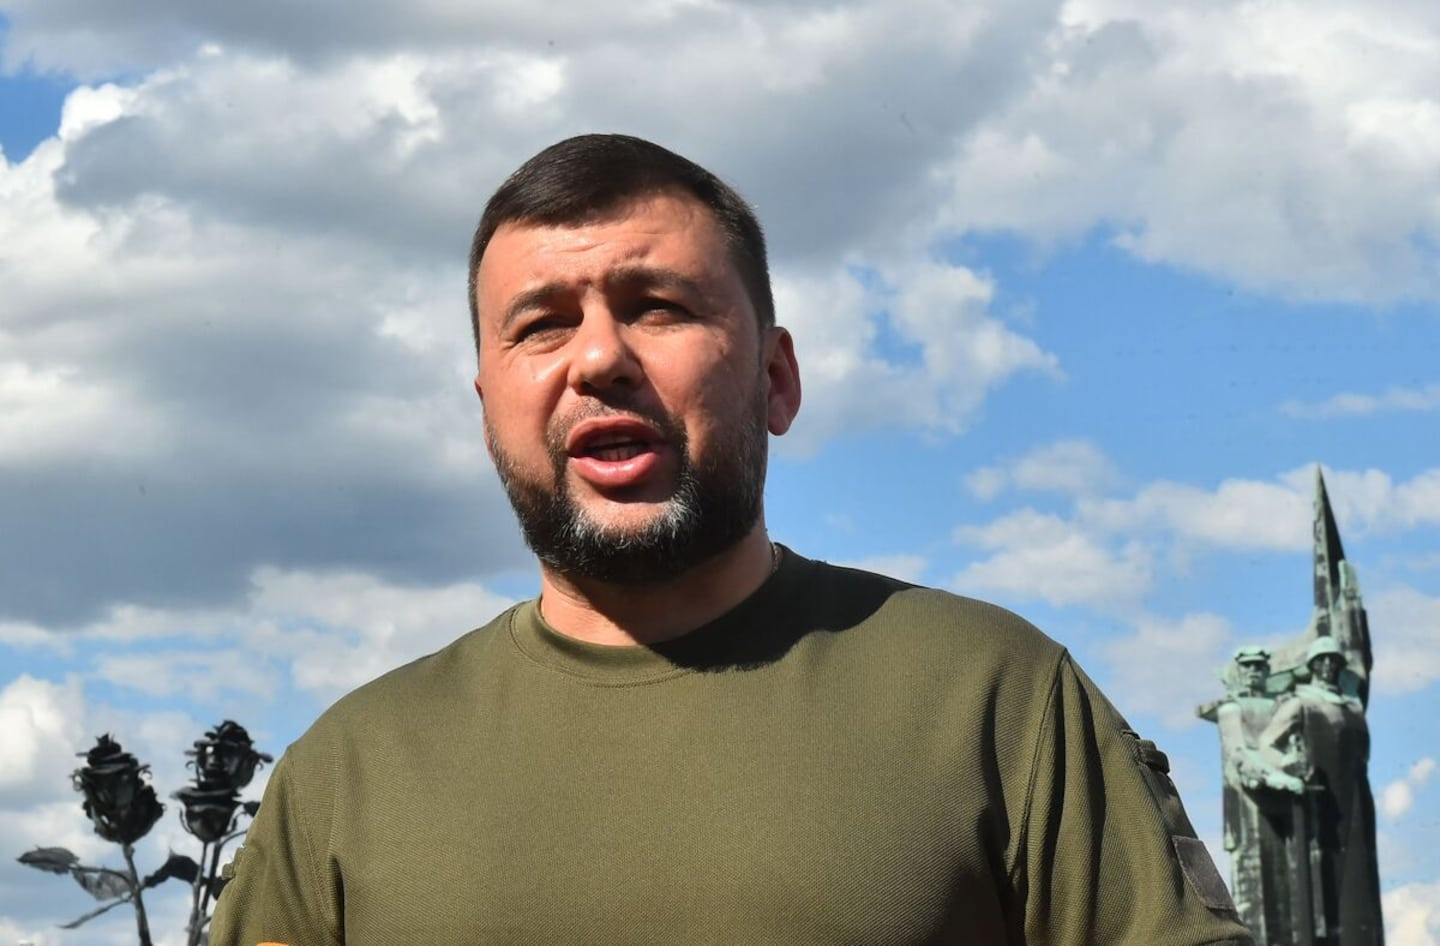 Donetsk separatist leader wants Russia to conquer all of Ukraine